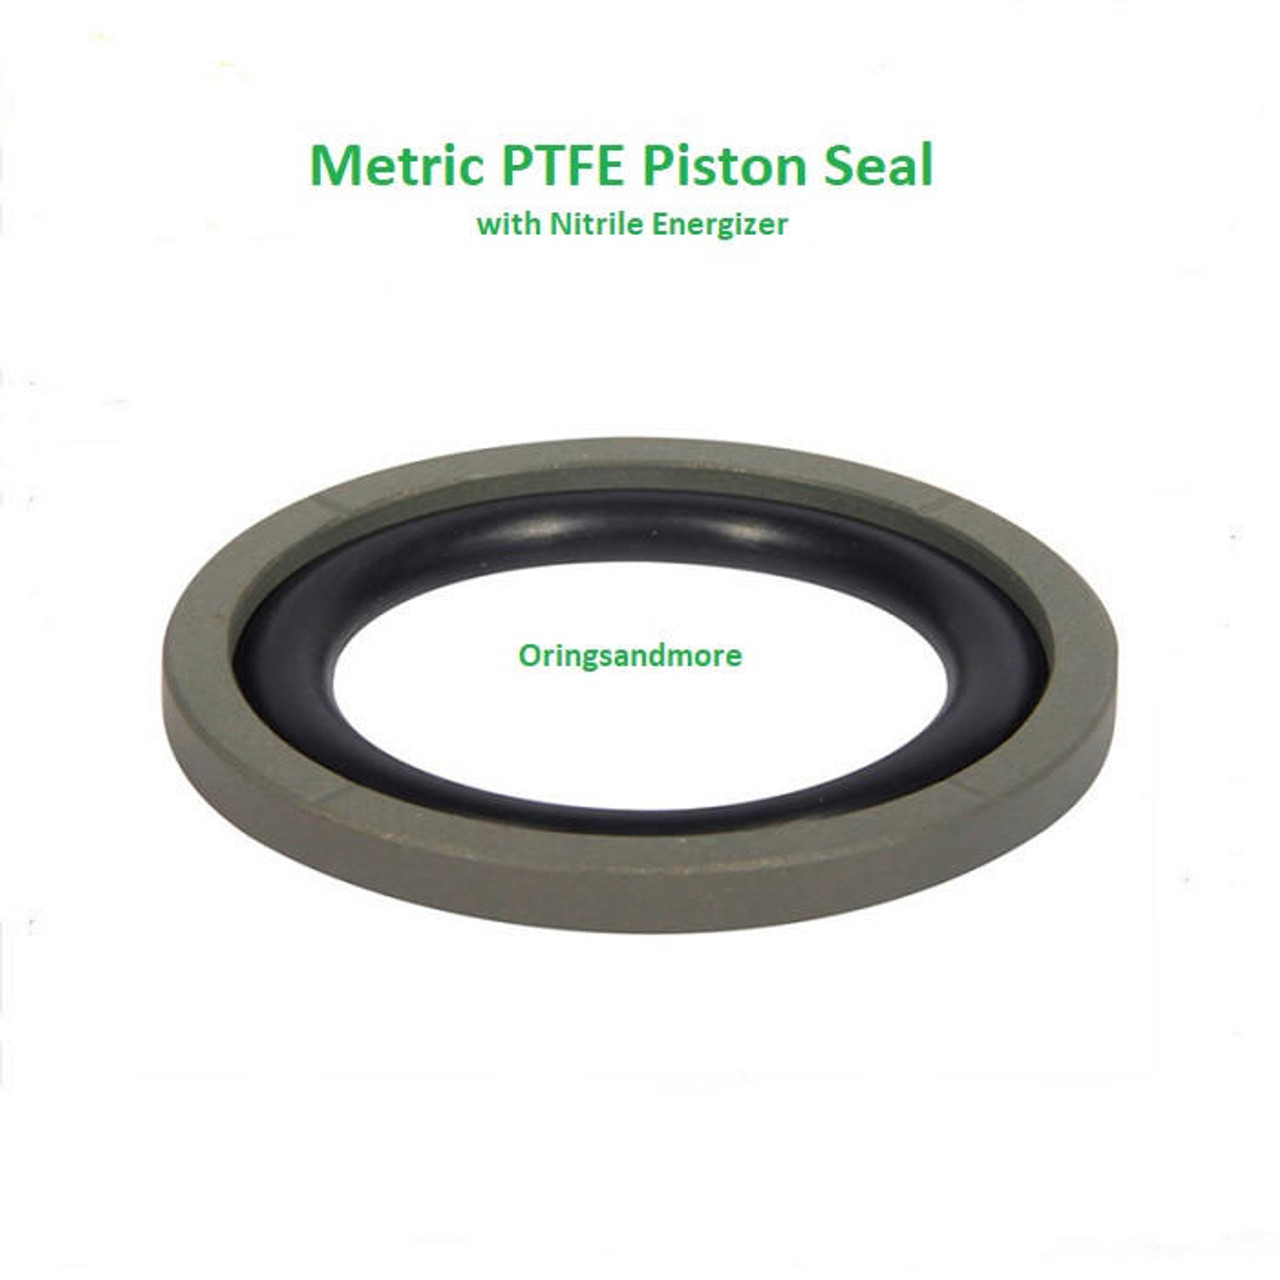 PTFE Piston Seal 45mm OD x 34mm ID x 4.2mm   Price for 1 pc